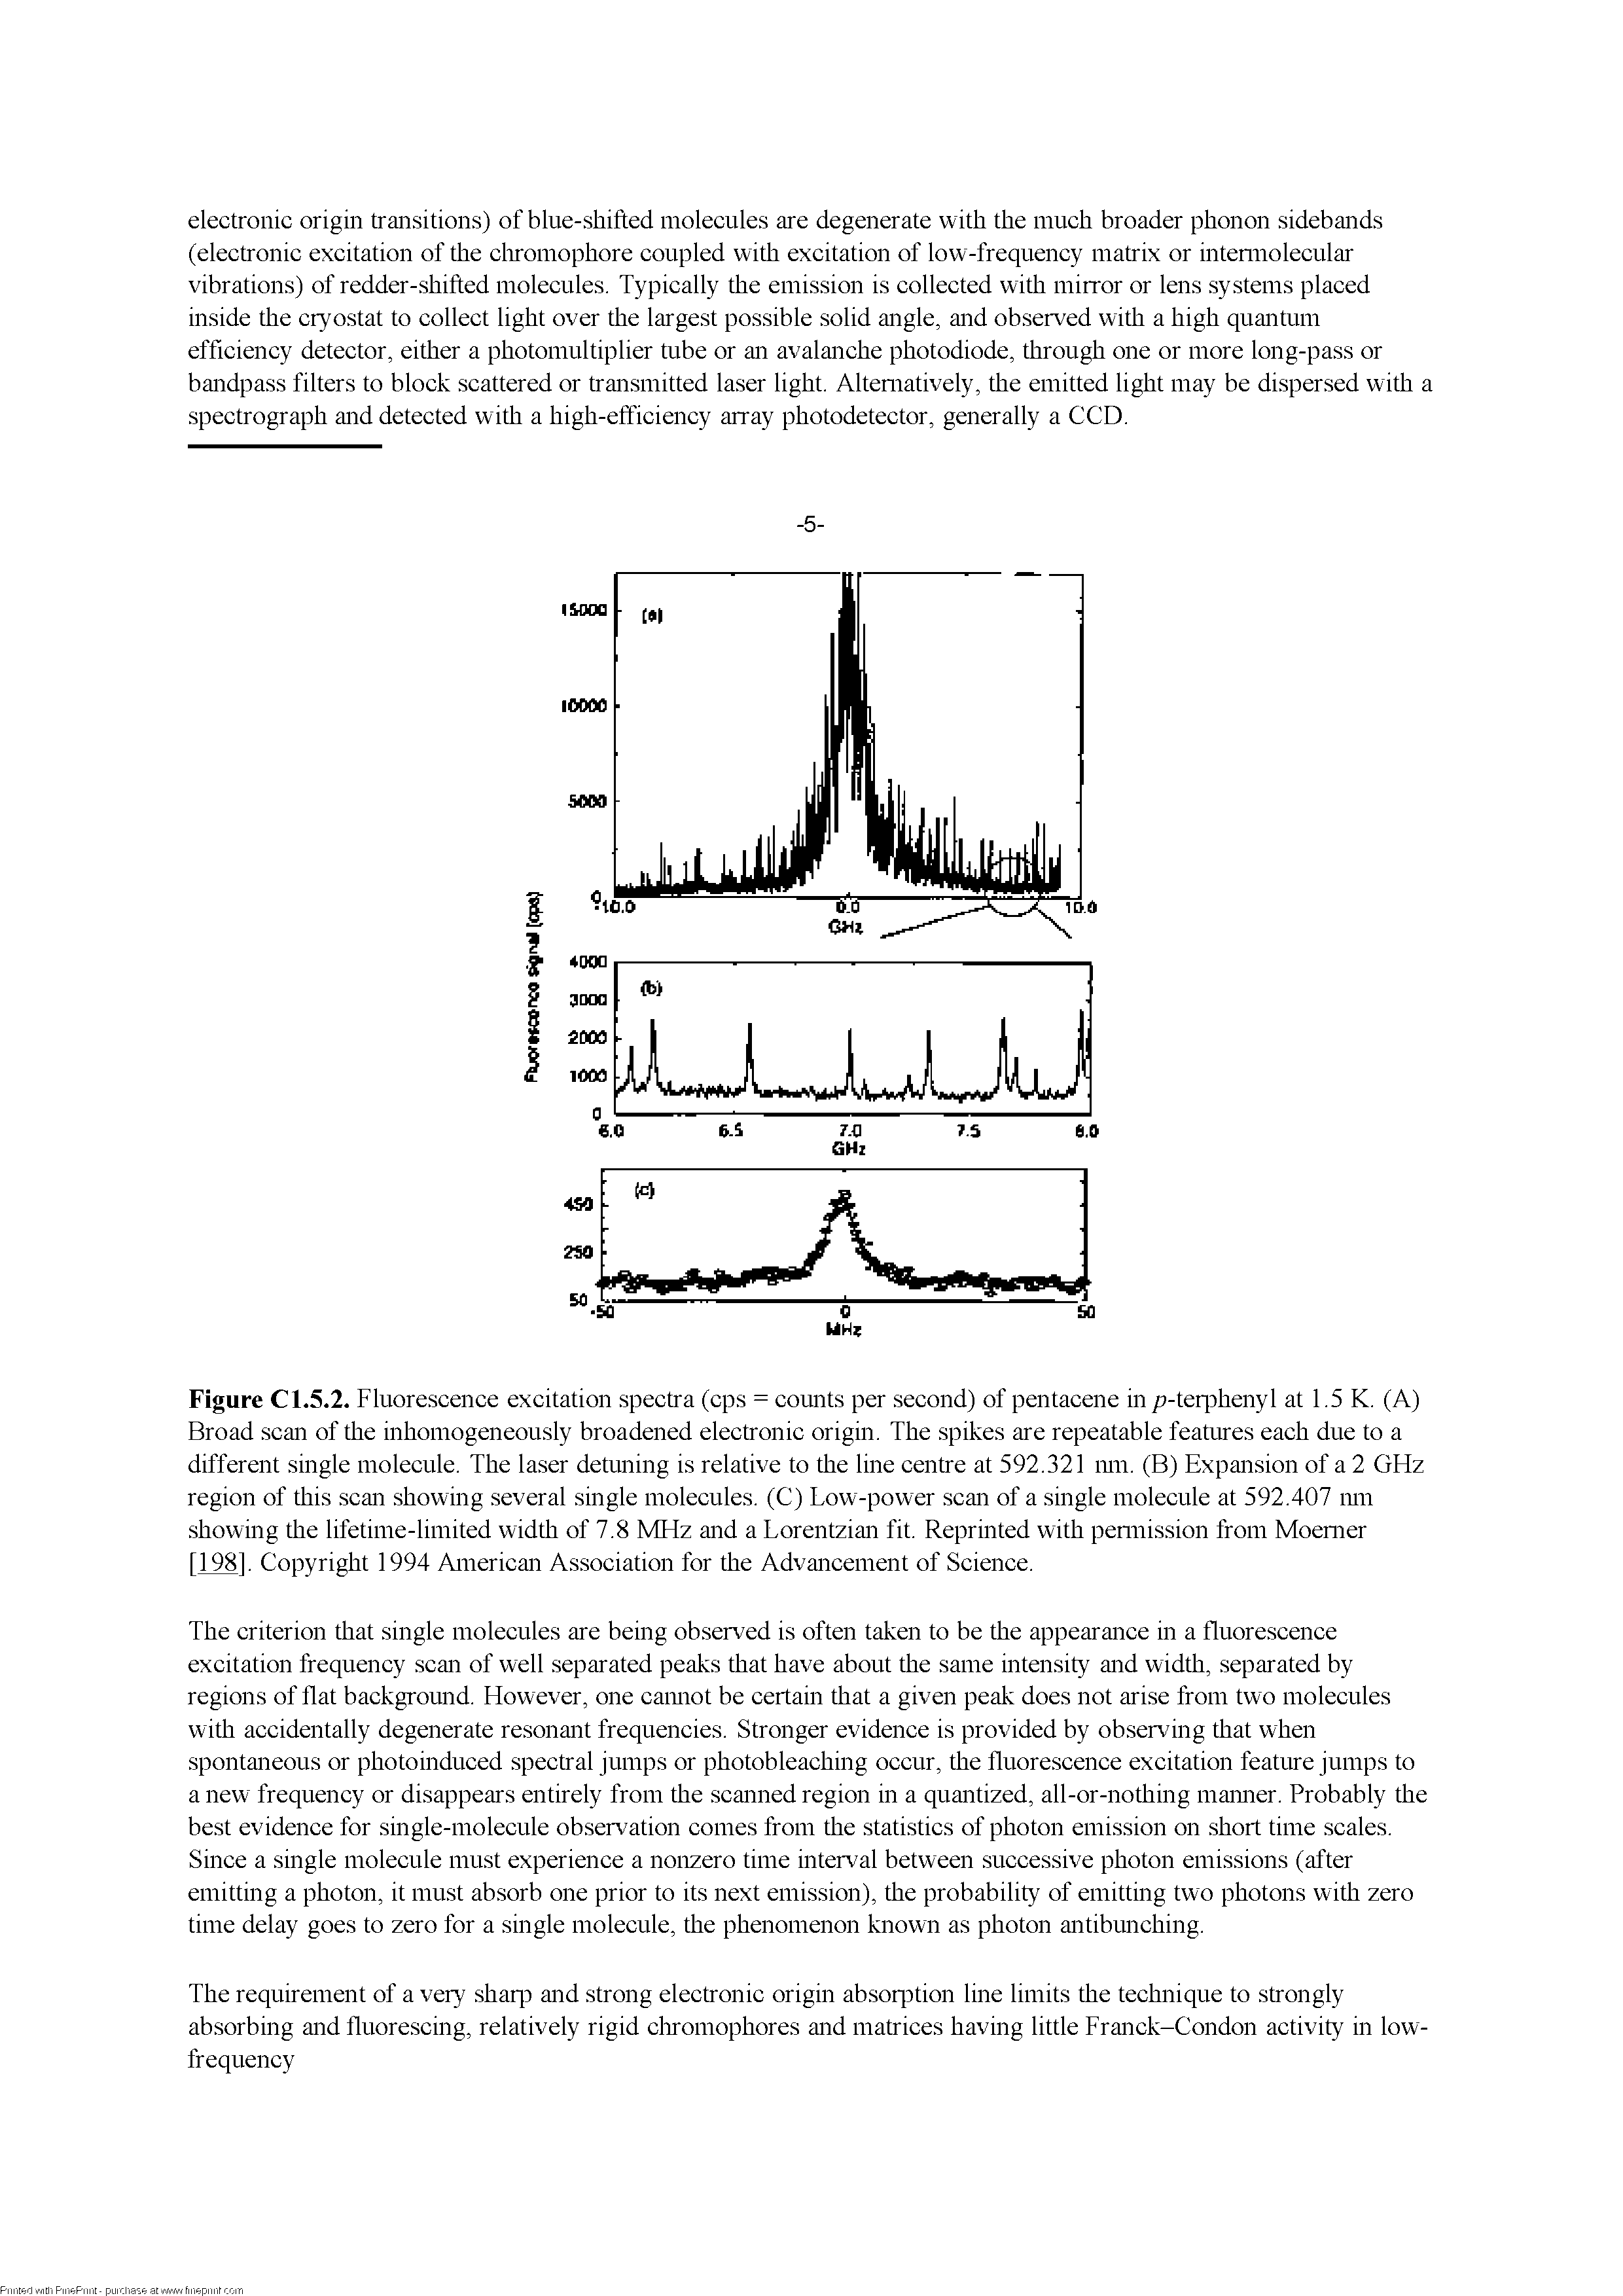 Figure Cl.5.2. Fluorescence excitation spectra (cps = counts per second) of pentacene in /i-teriDhenyl at 1.5 K. (A) Broad scan of the inhomogeneously broadened electronic origin. The spikes are repeatable features each due to a different single molecule. The laser detuning is relative to the line centre at 592.321 nm. (B) Expansion of a 2 GHz region of this scan showing several single molecules. (C) Low-power scan of a single molecule at 592.407 nm showing the lifetime-limited width of 7.8 MHz and a Lorentzian fit. Reprinted with pennission from Moemer [198]. Copyright 1994 American Association for the Advancement of Science.